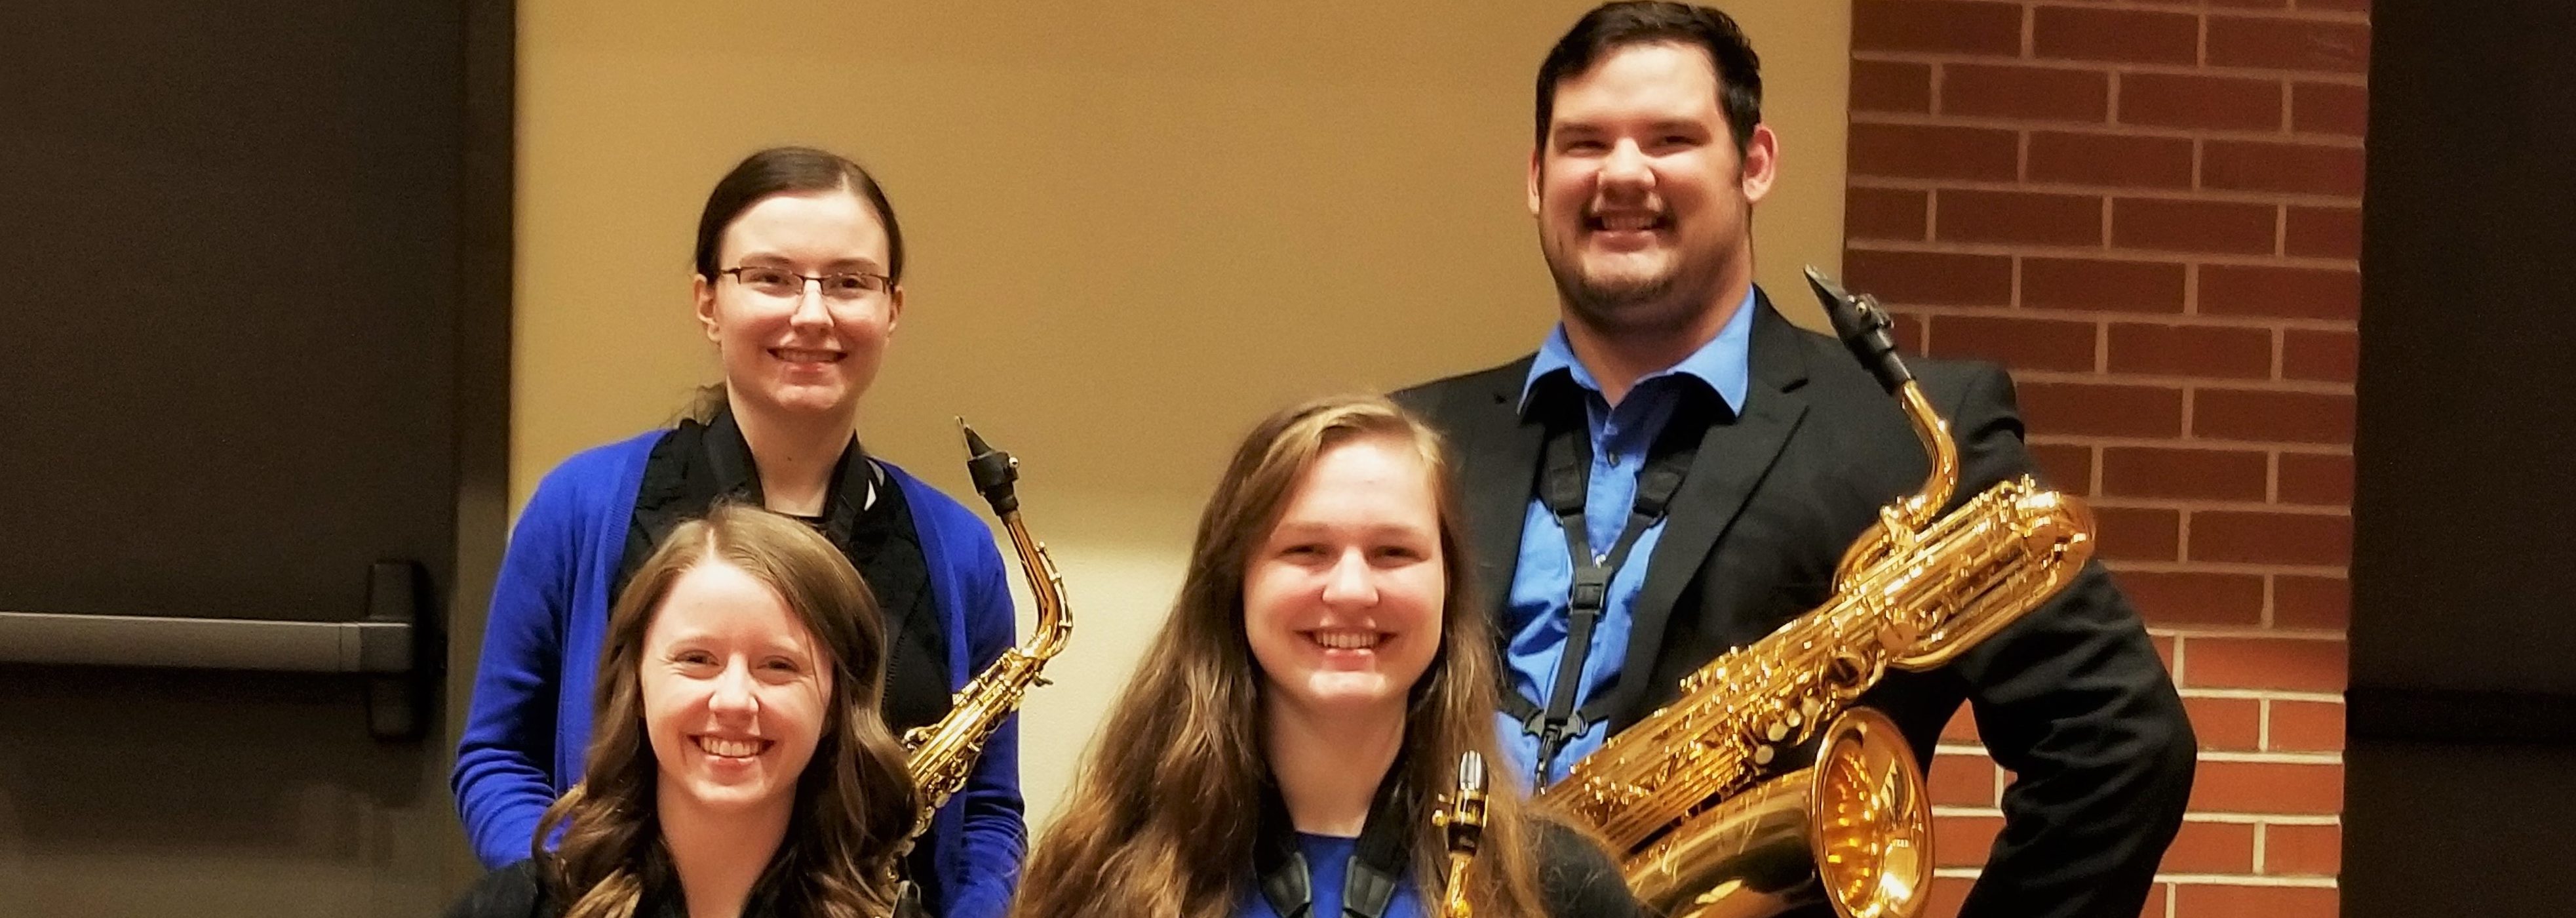 Pictured are Ouachita’s Saxophone Quartet members (front row, from left) Sierra Westberg, Morgan Taylor, (back row) Katelyn Still and C.J. Slatton.